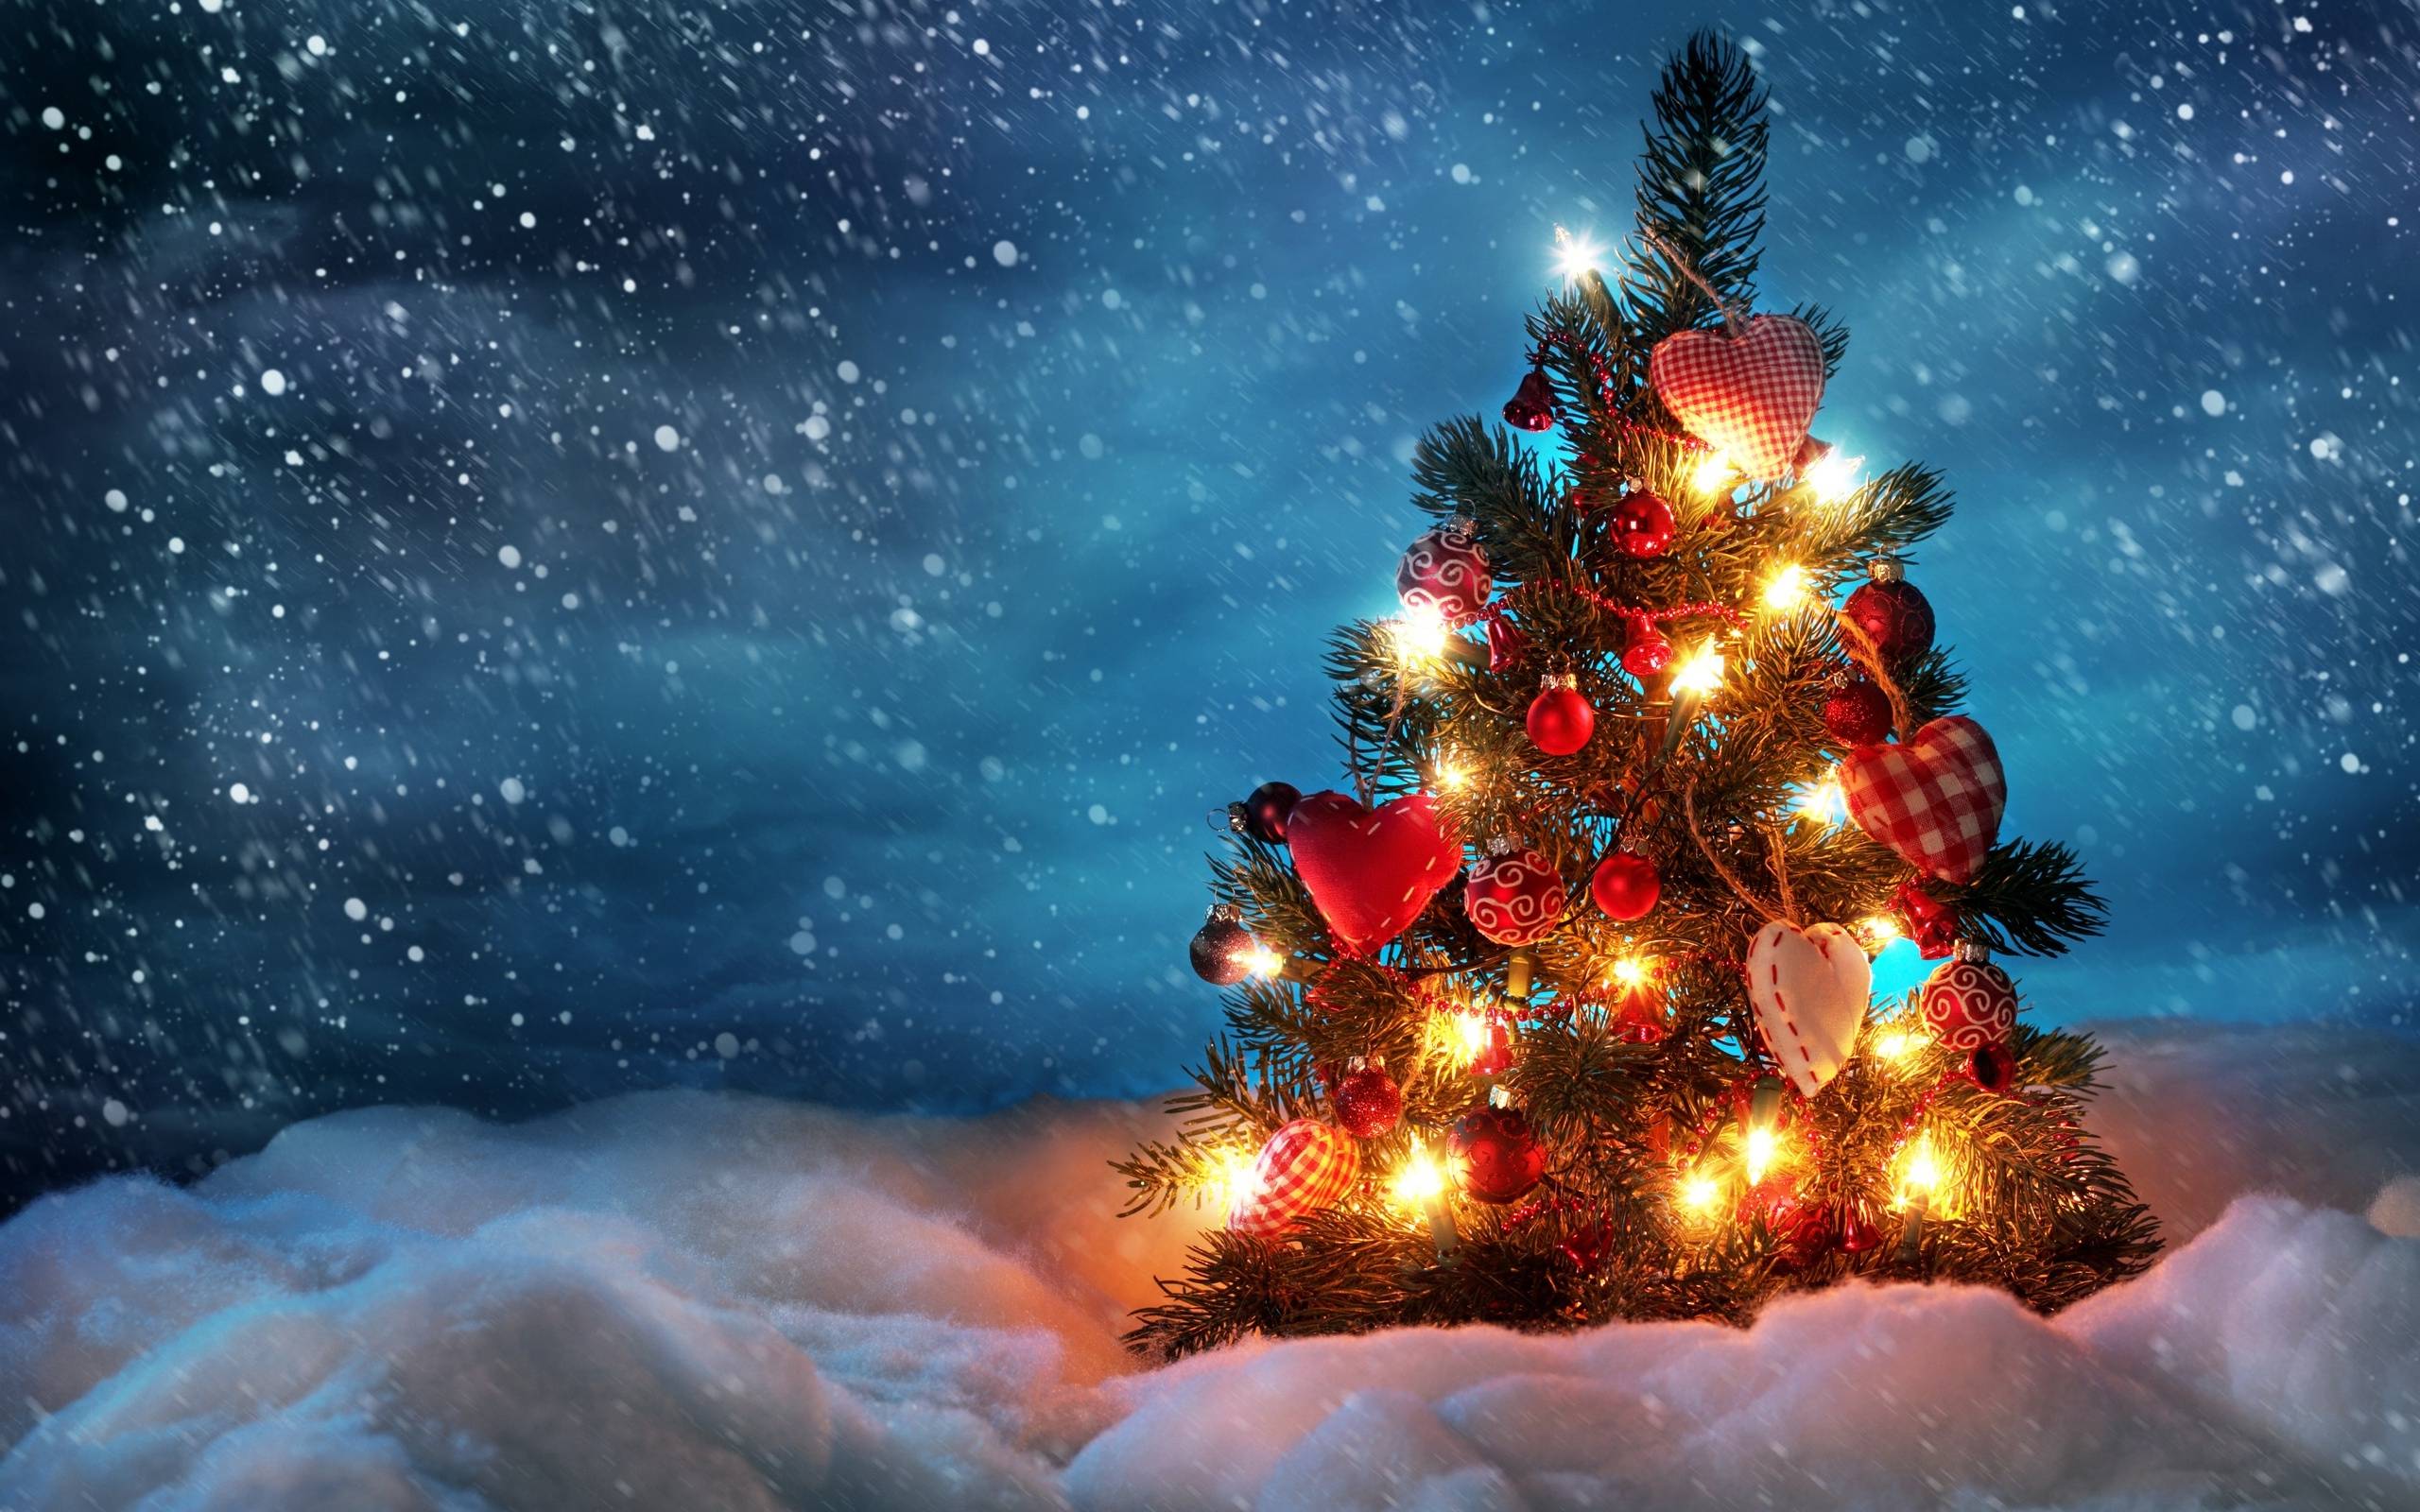 Christmas Tree With Snow And Lights Decoration Wallpapers